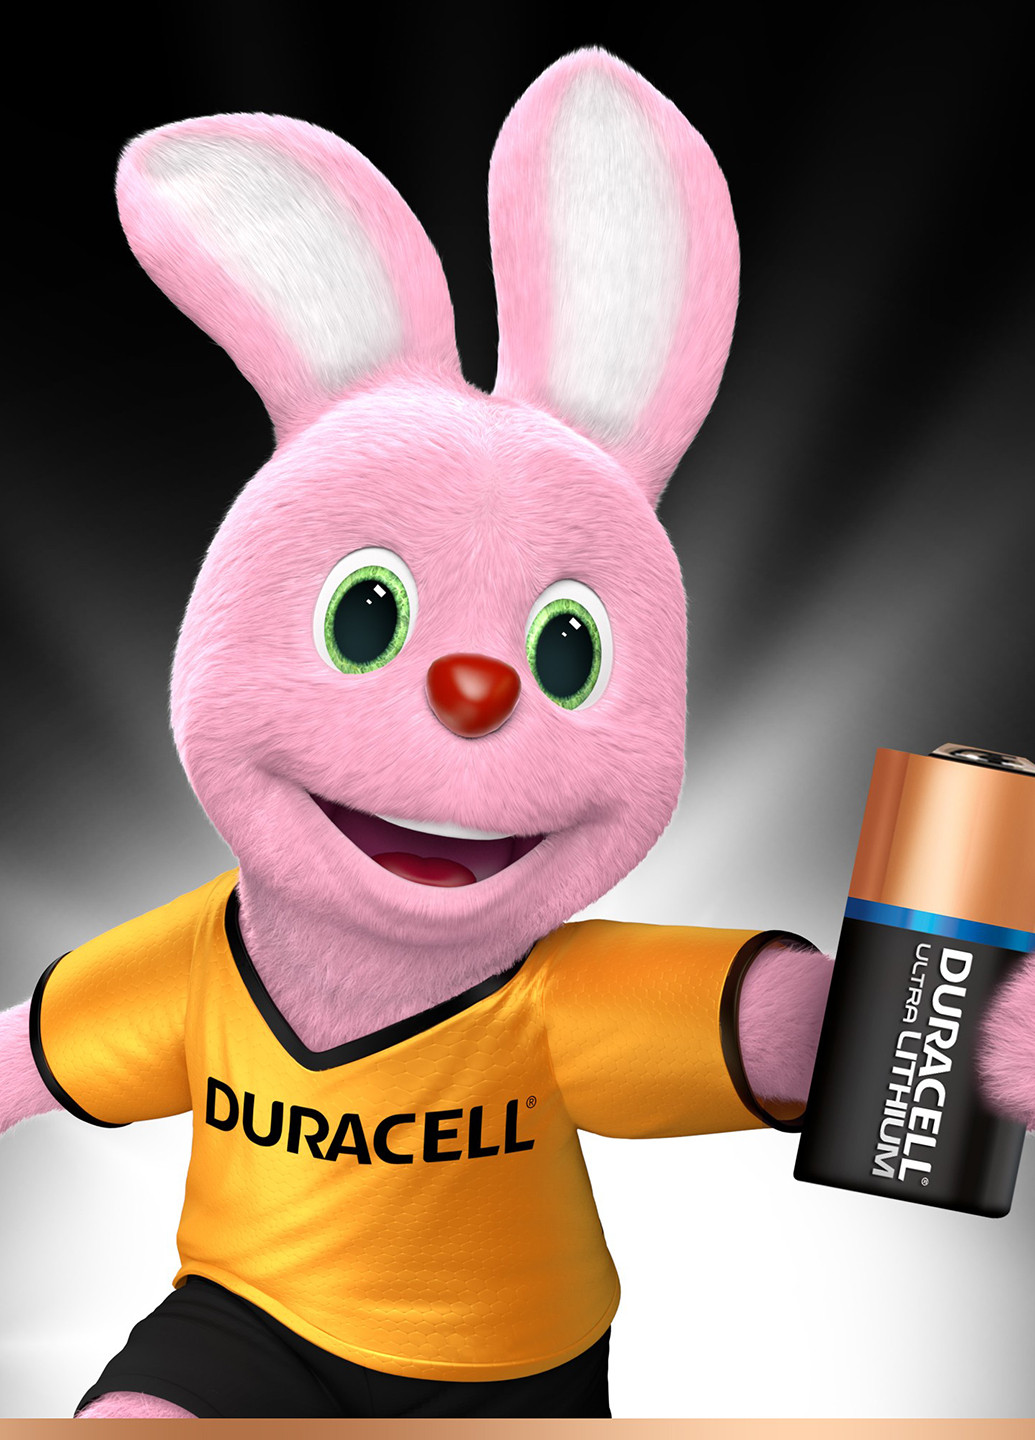 Фотобатарея Ultra 123, 2 шт Duracell (52586329)